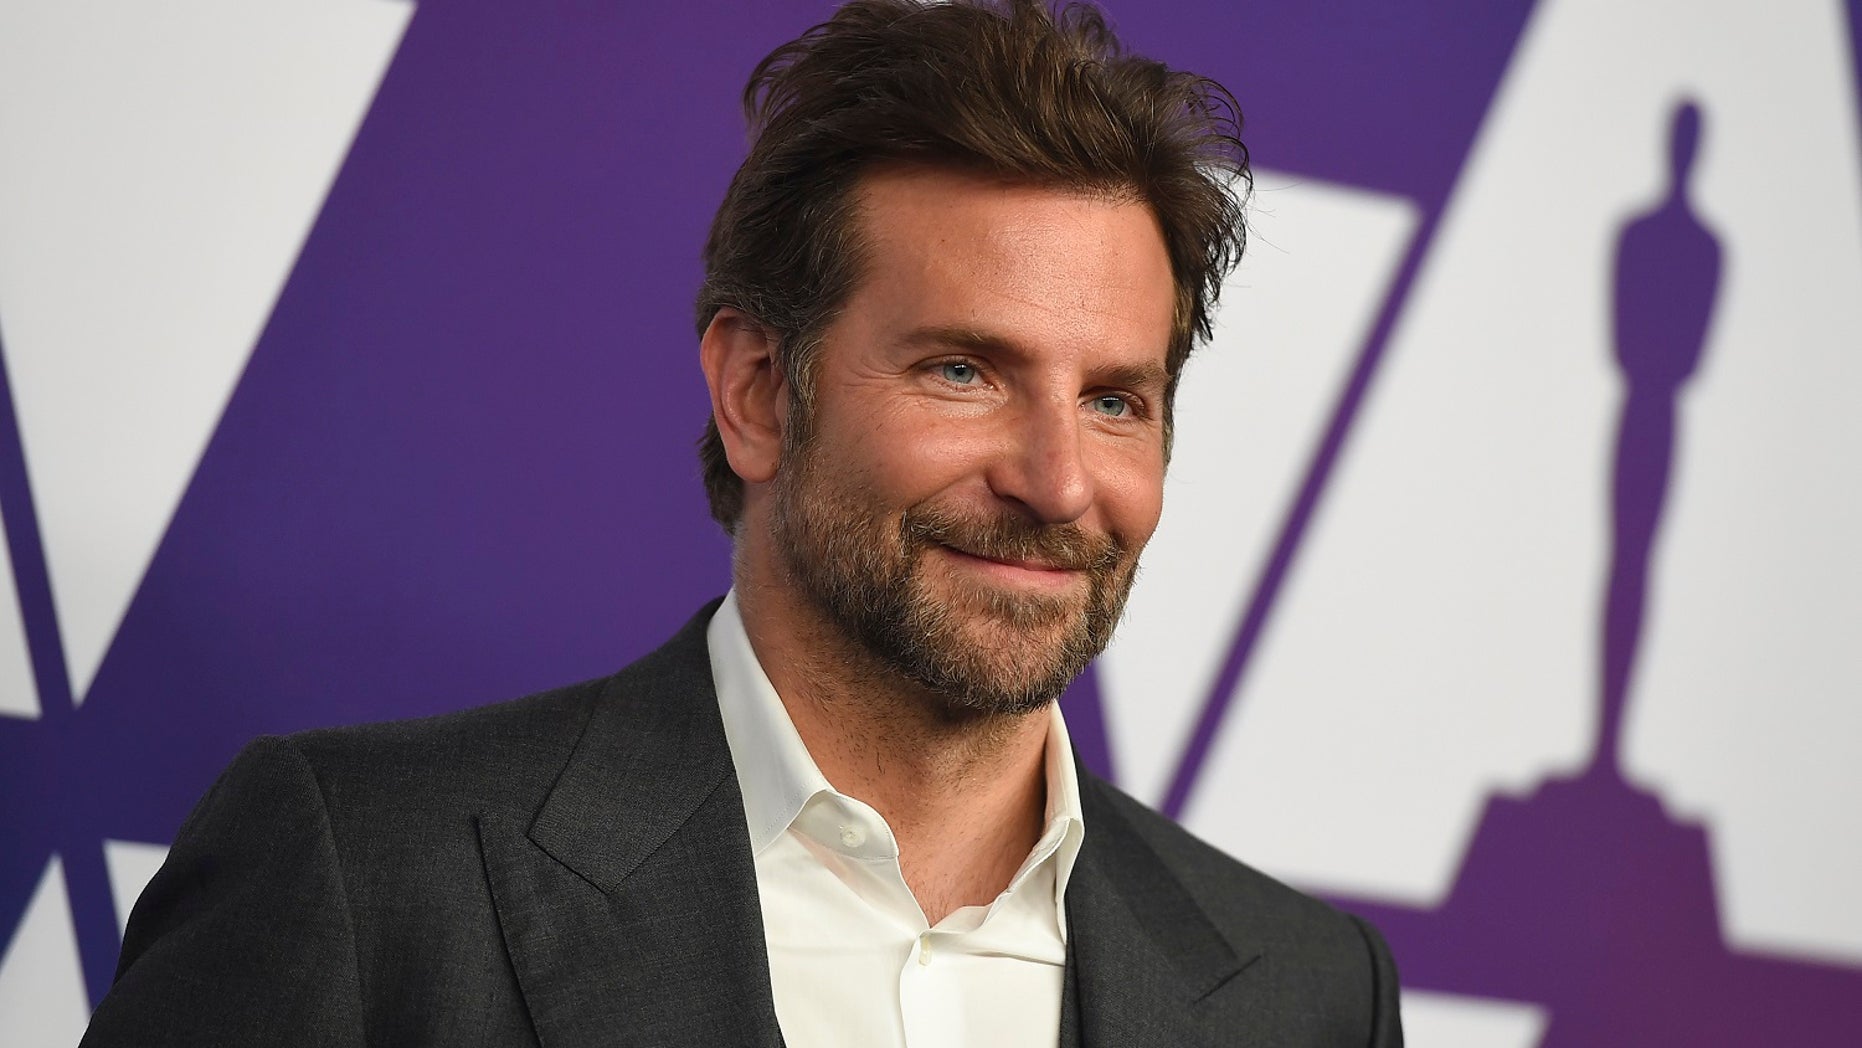 Bradley Cooper on singing ‘Shallow’ from ‘A Star Is Born’ live at the Oscars: ‘I’m sure I’ll be terrified’